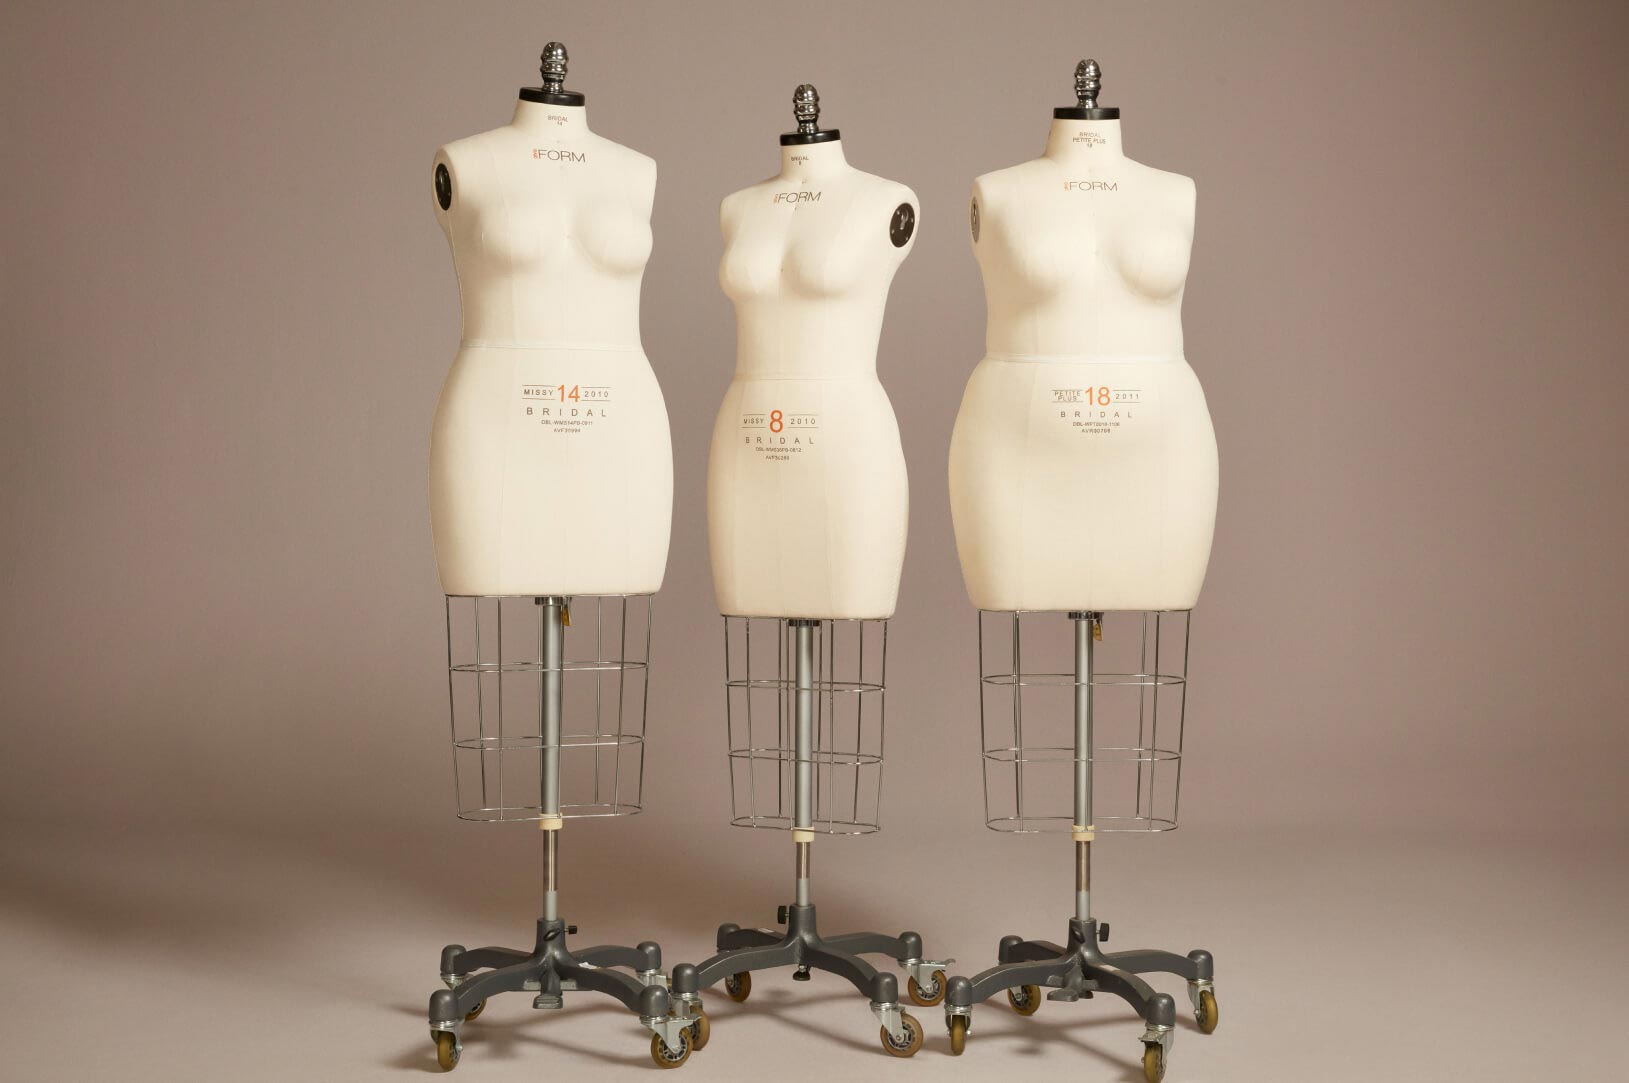 group of bustform mannequins next to each other